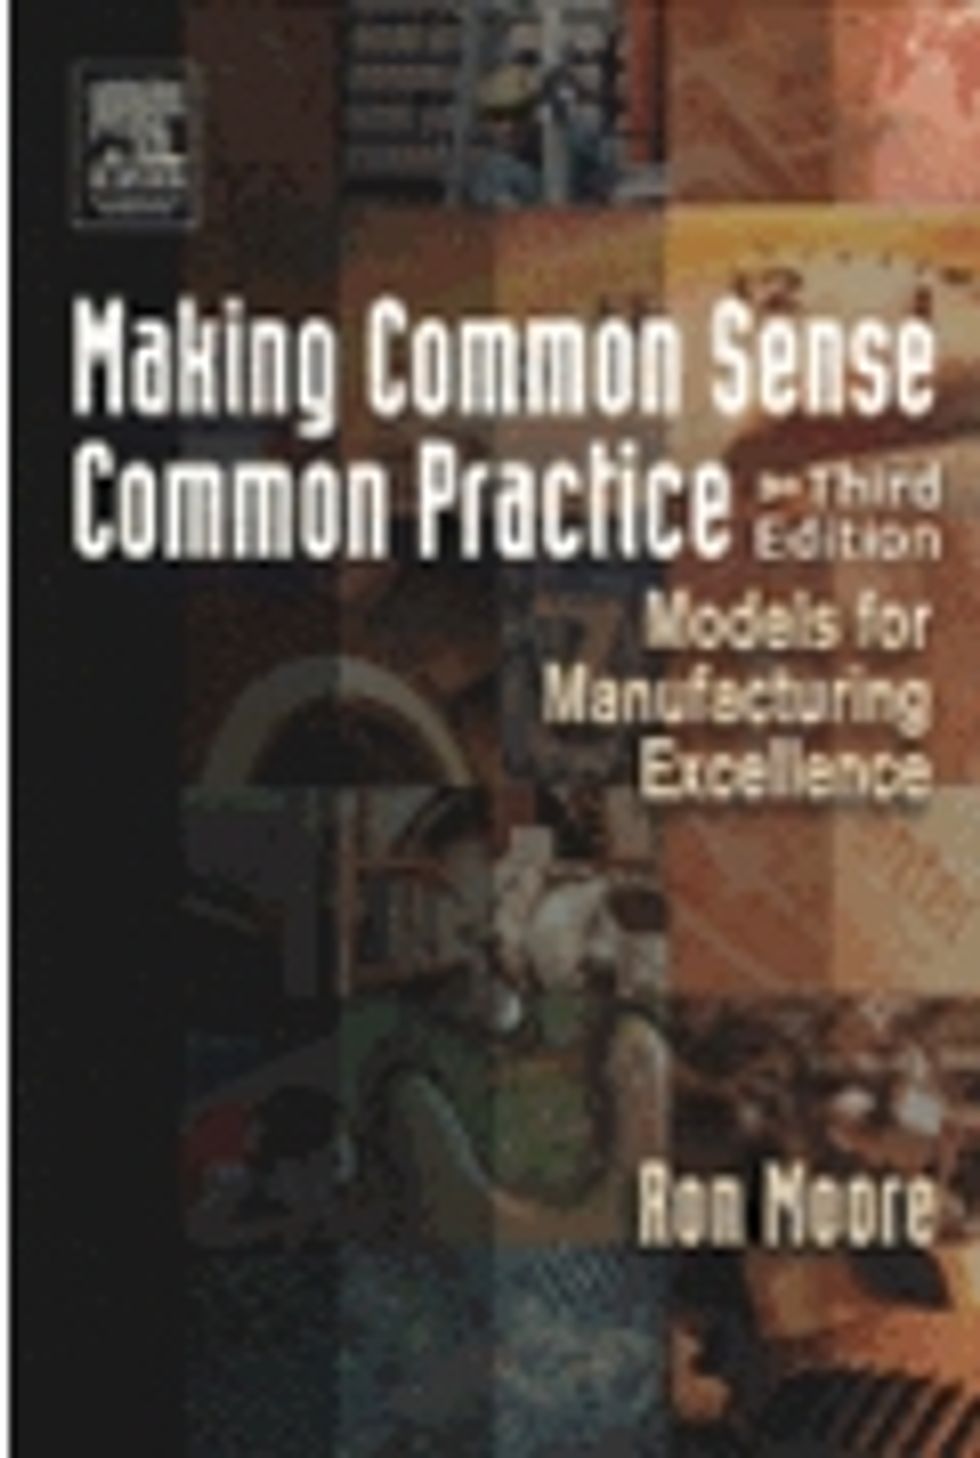 Making Common Sense Common Practice, Models for Manufacturing Excellence by Ron Moore, P.E. 